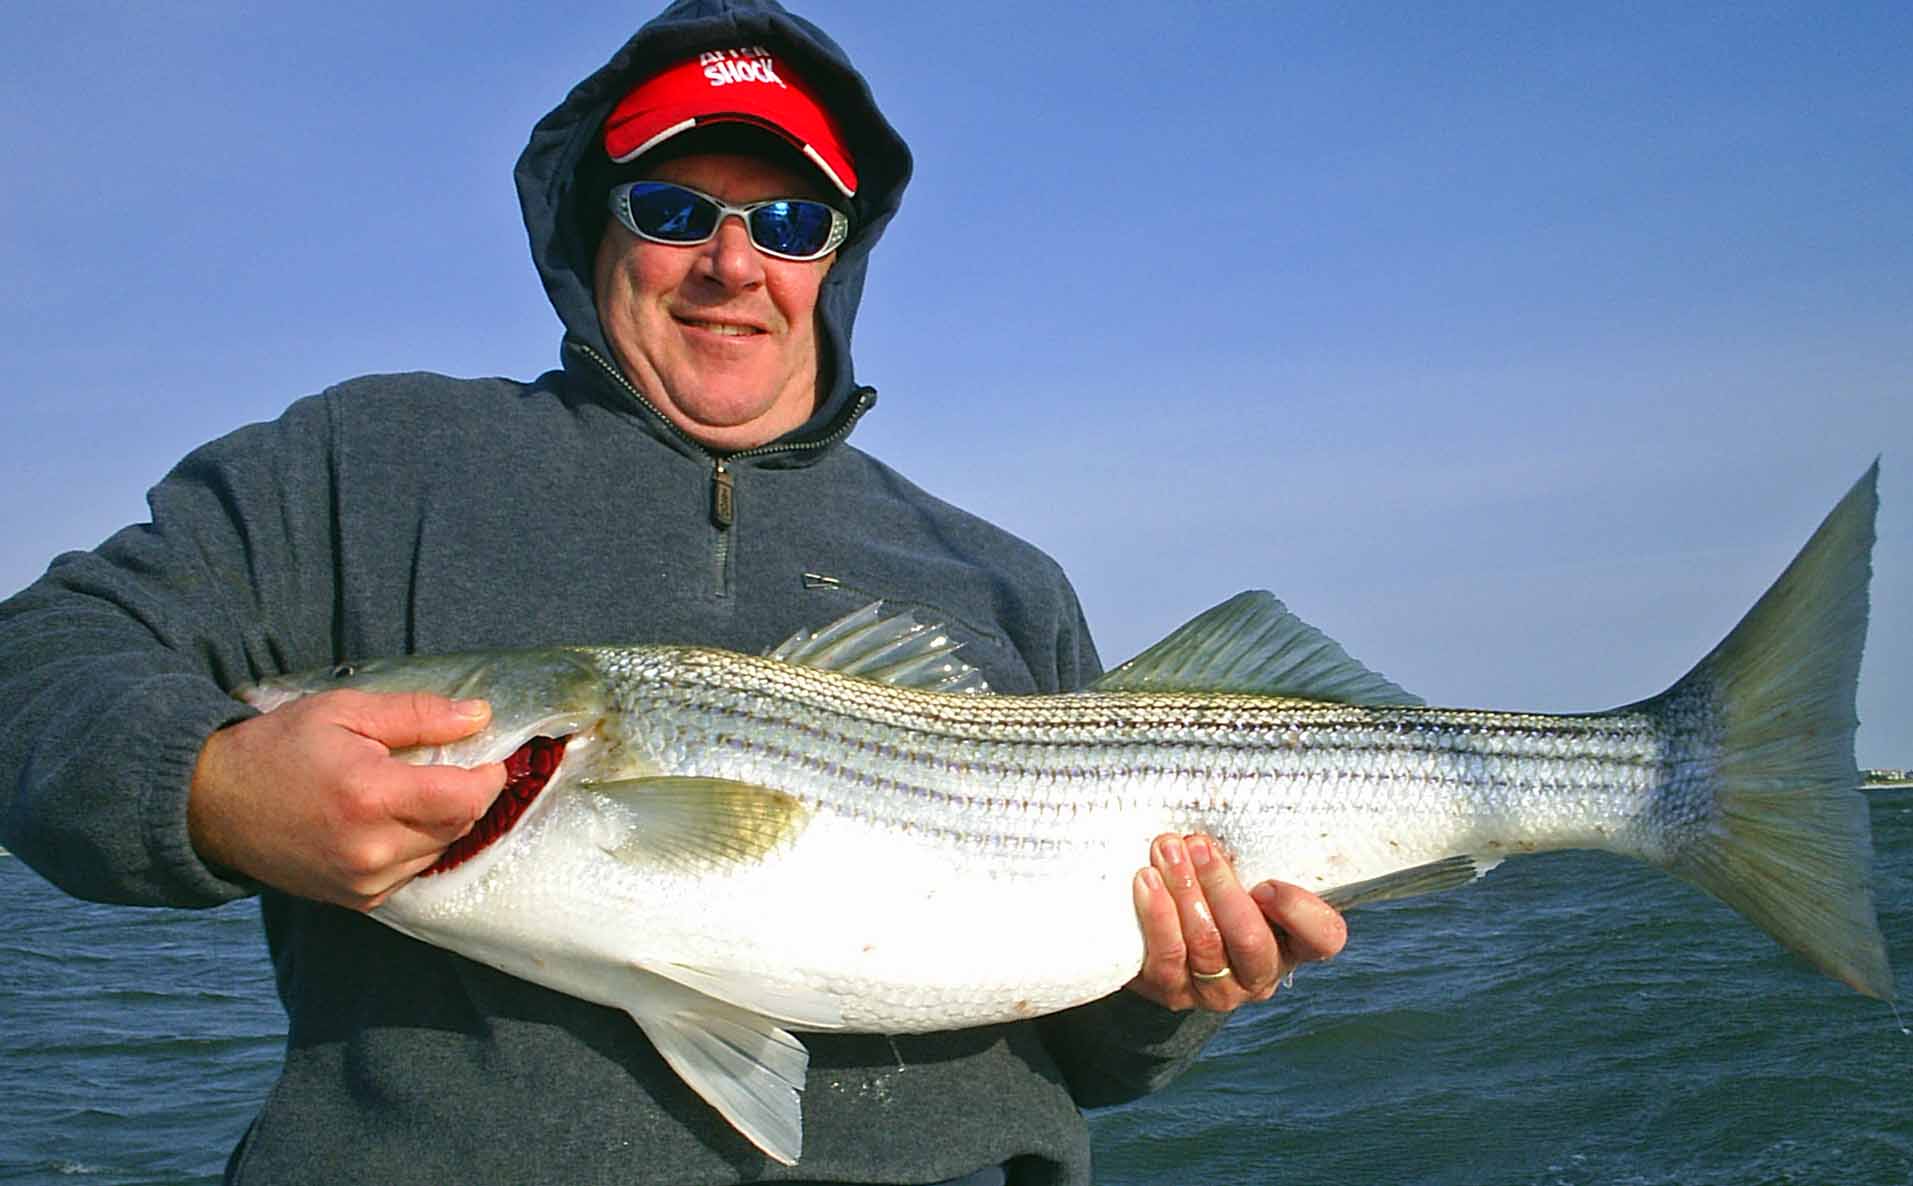 striped bass, stripers are prevalent in the fall